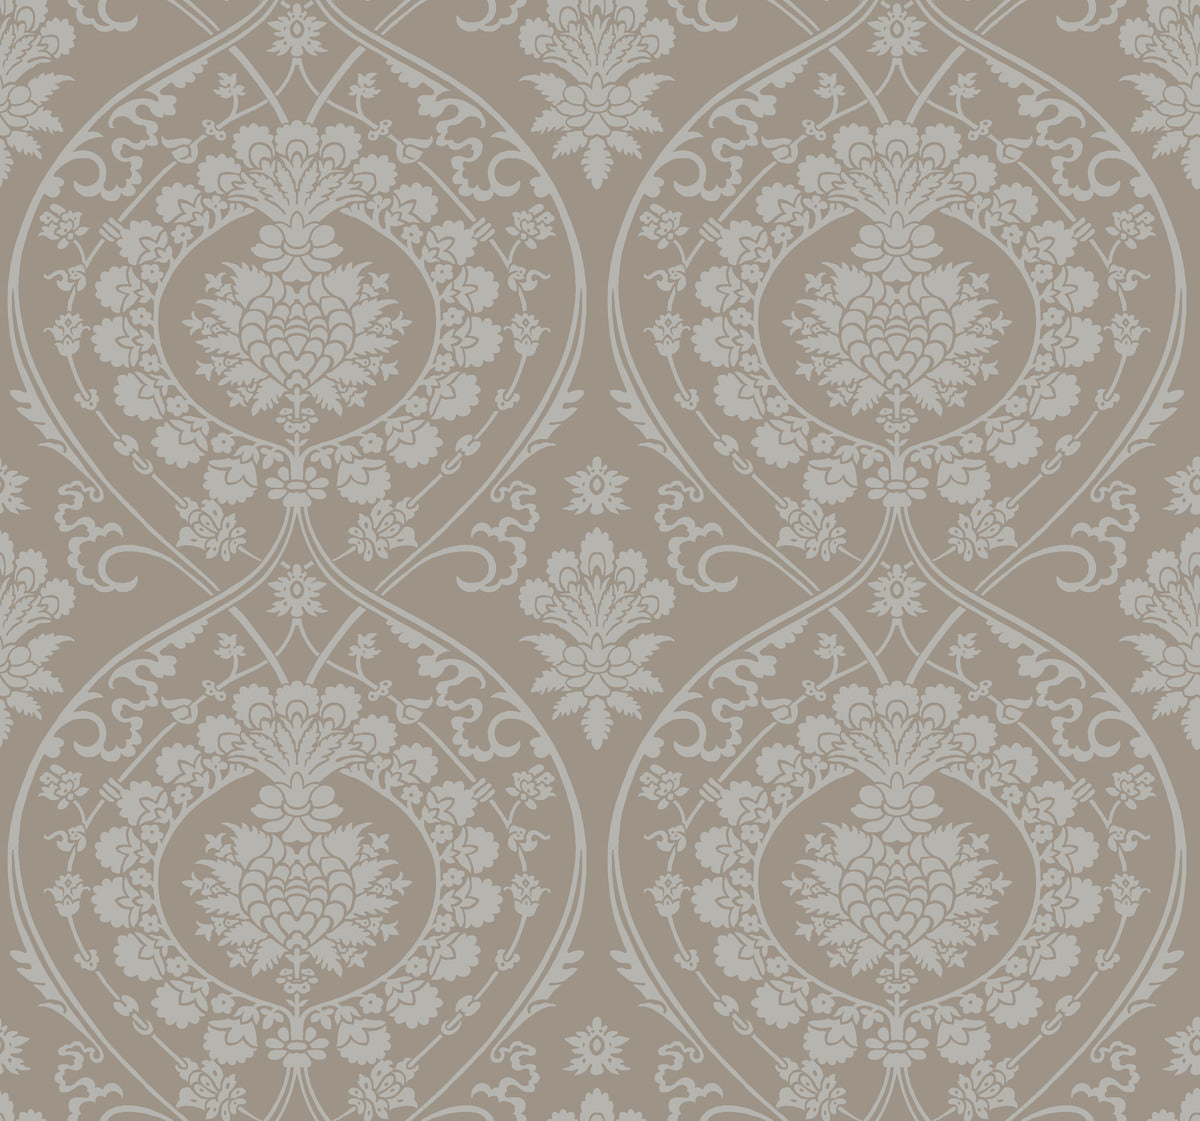 Damask Resource Library Imperial Damask Wallpaper - Crockers Paint & Wallpaper